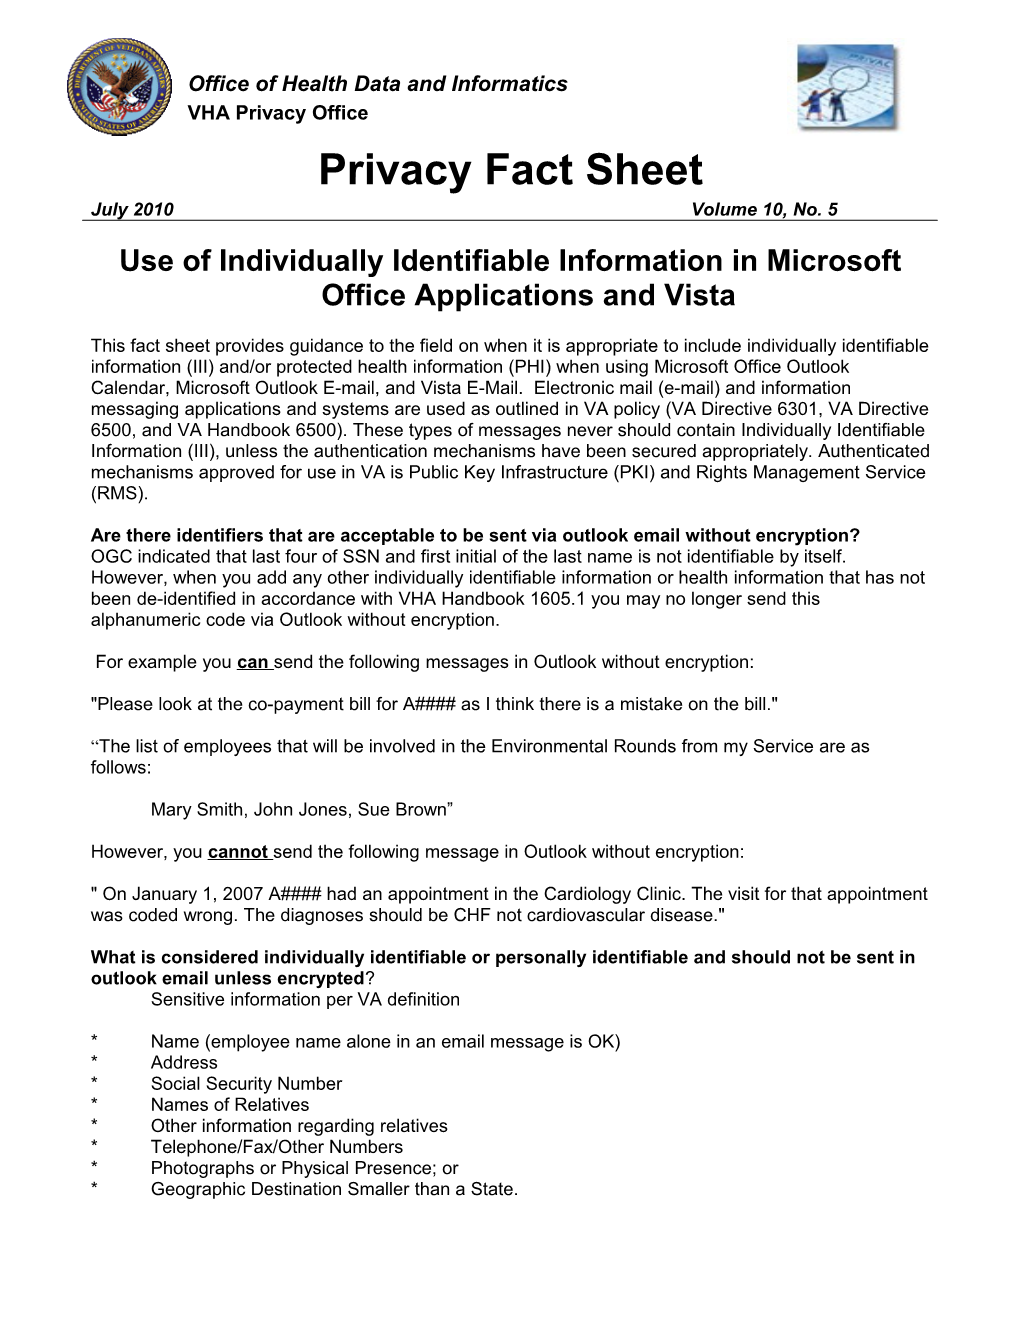 Fact Sheet - Use Of Individually Identifiable Information In Microsoft Office Applications And Vista